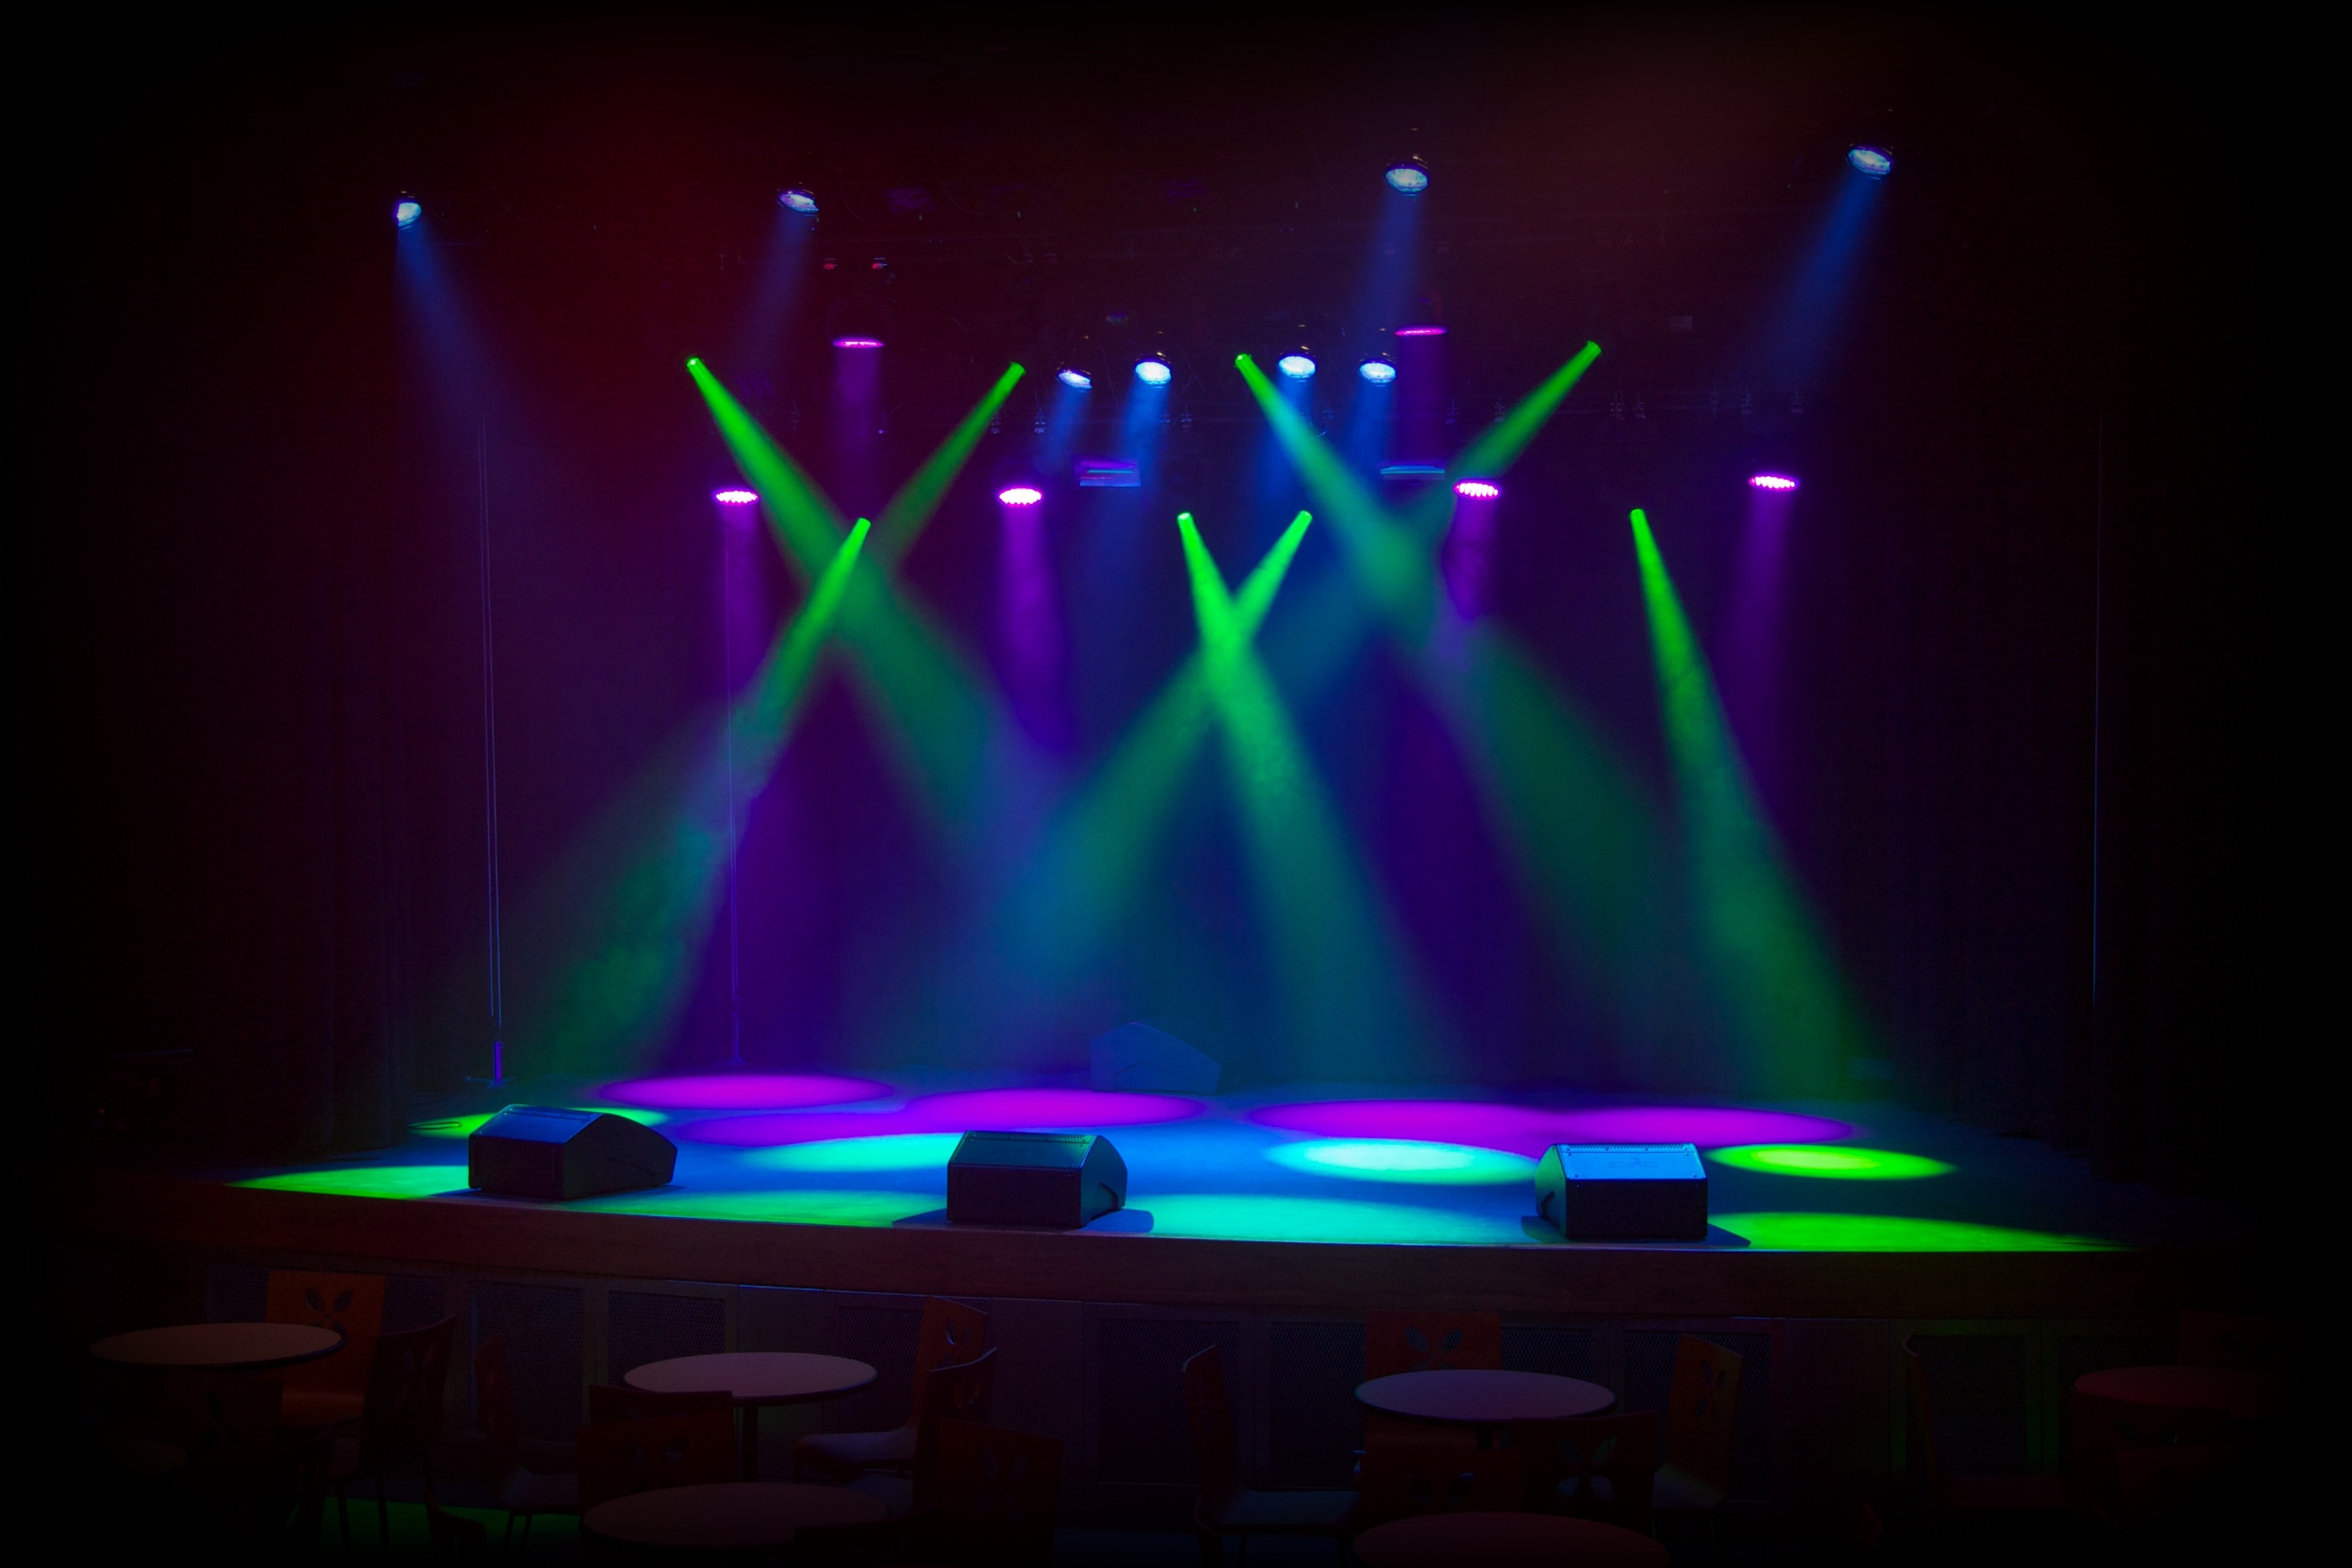 Free Stage Lights, Download Free Stage Lights png images, Free ClipArts ...